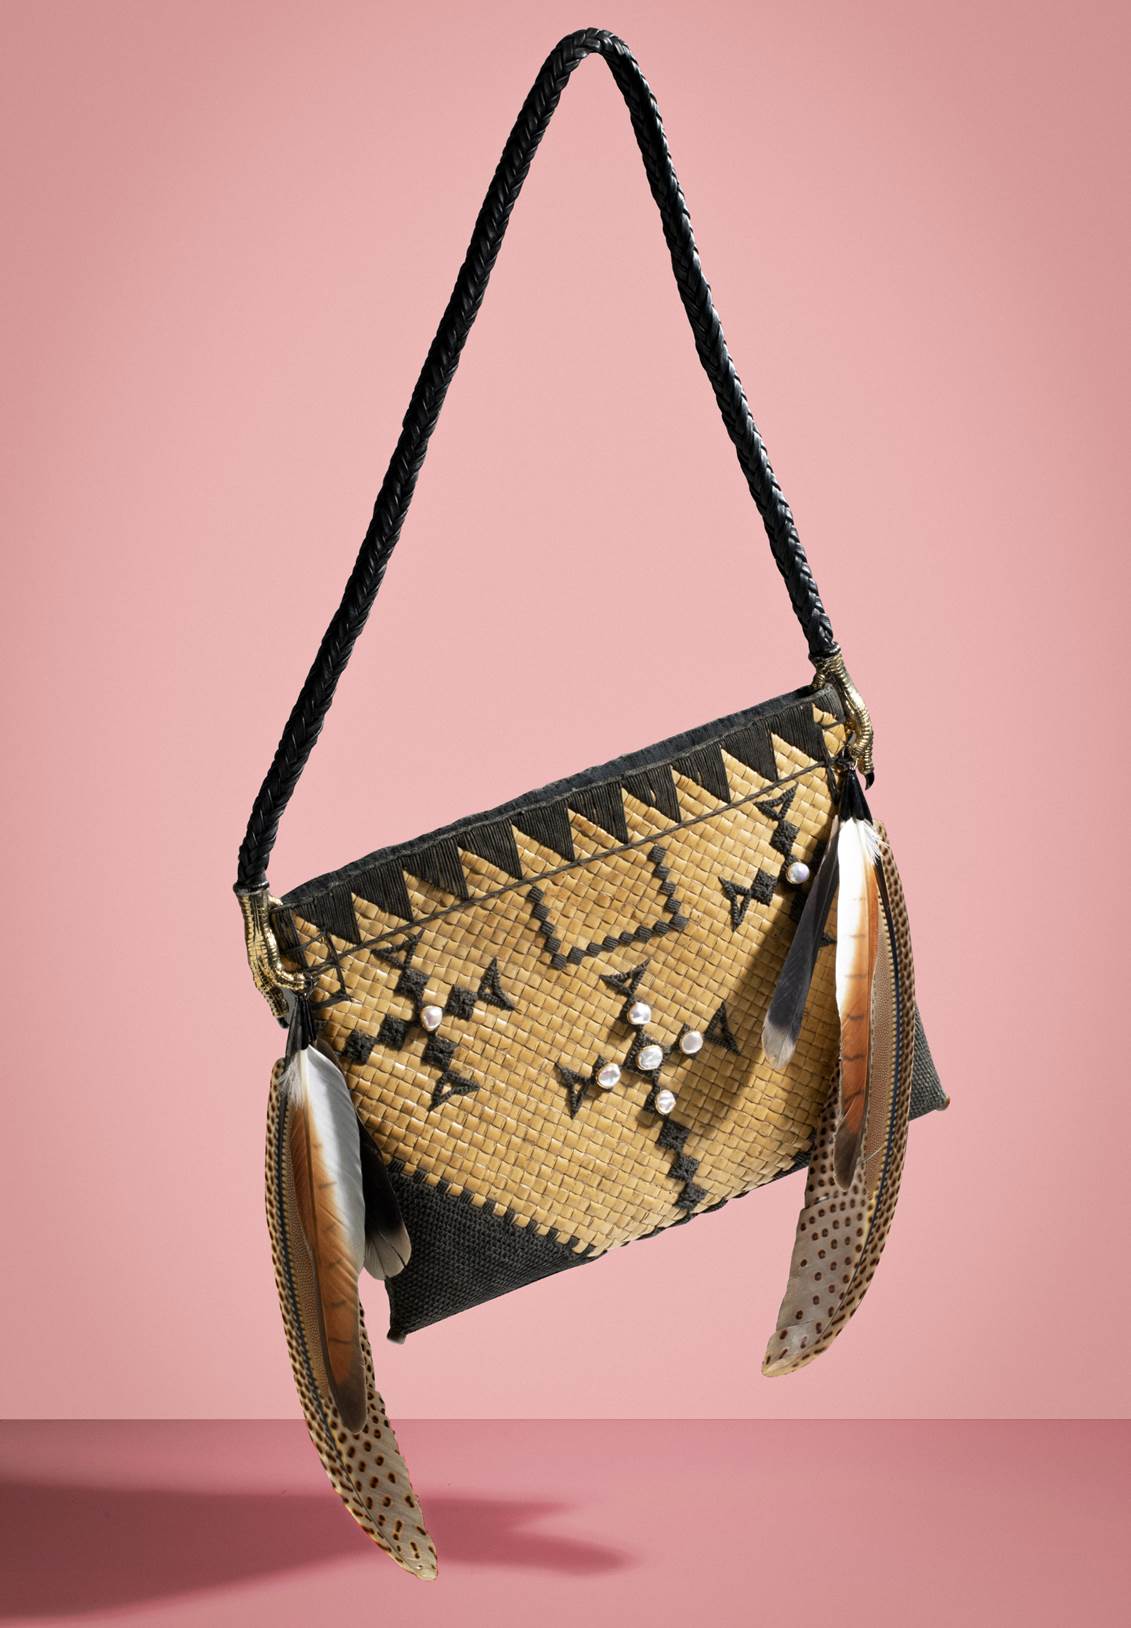 Indonesian Tribal Woven Handbag with Pearl and Feather